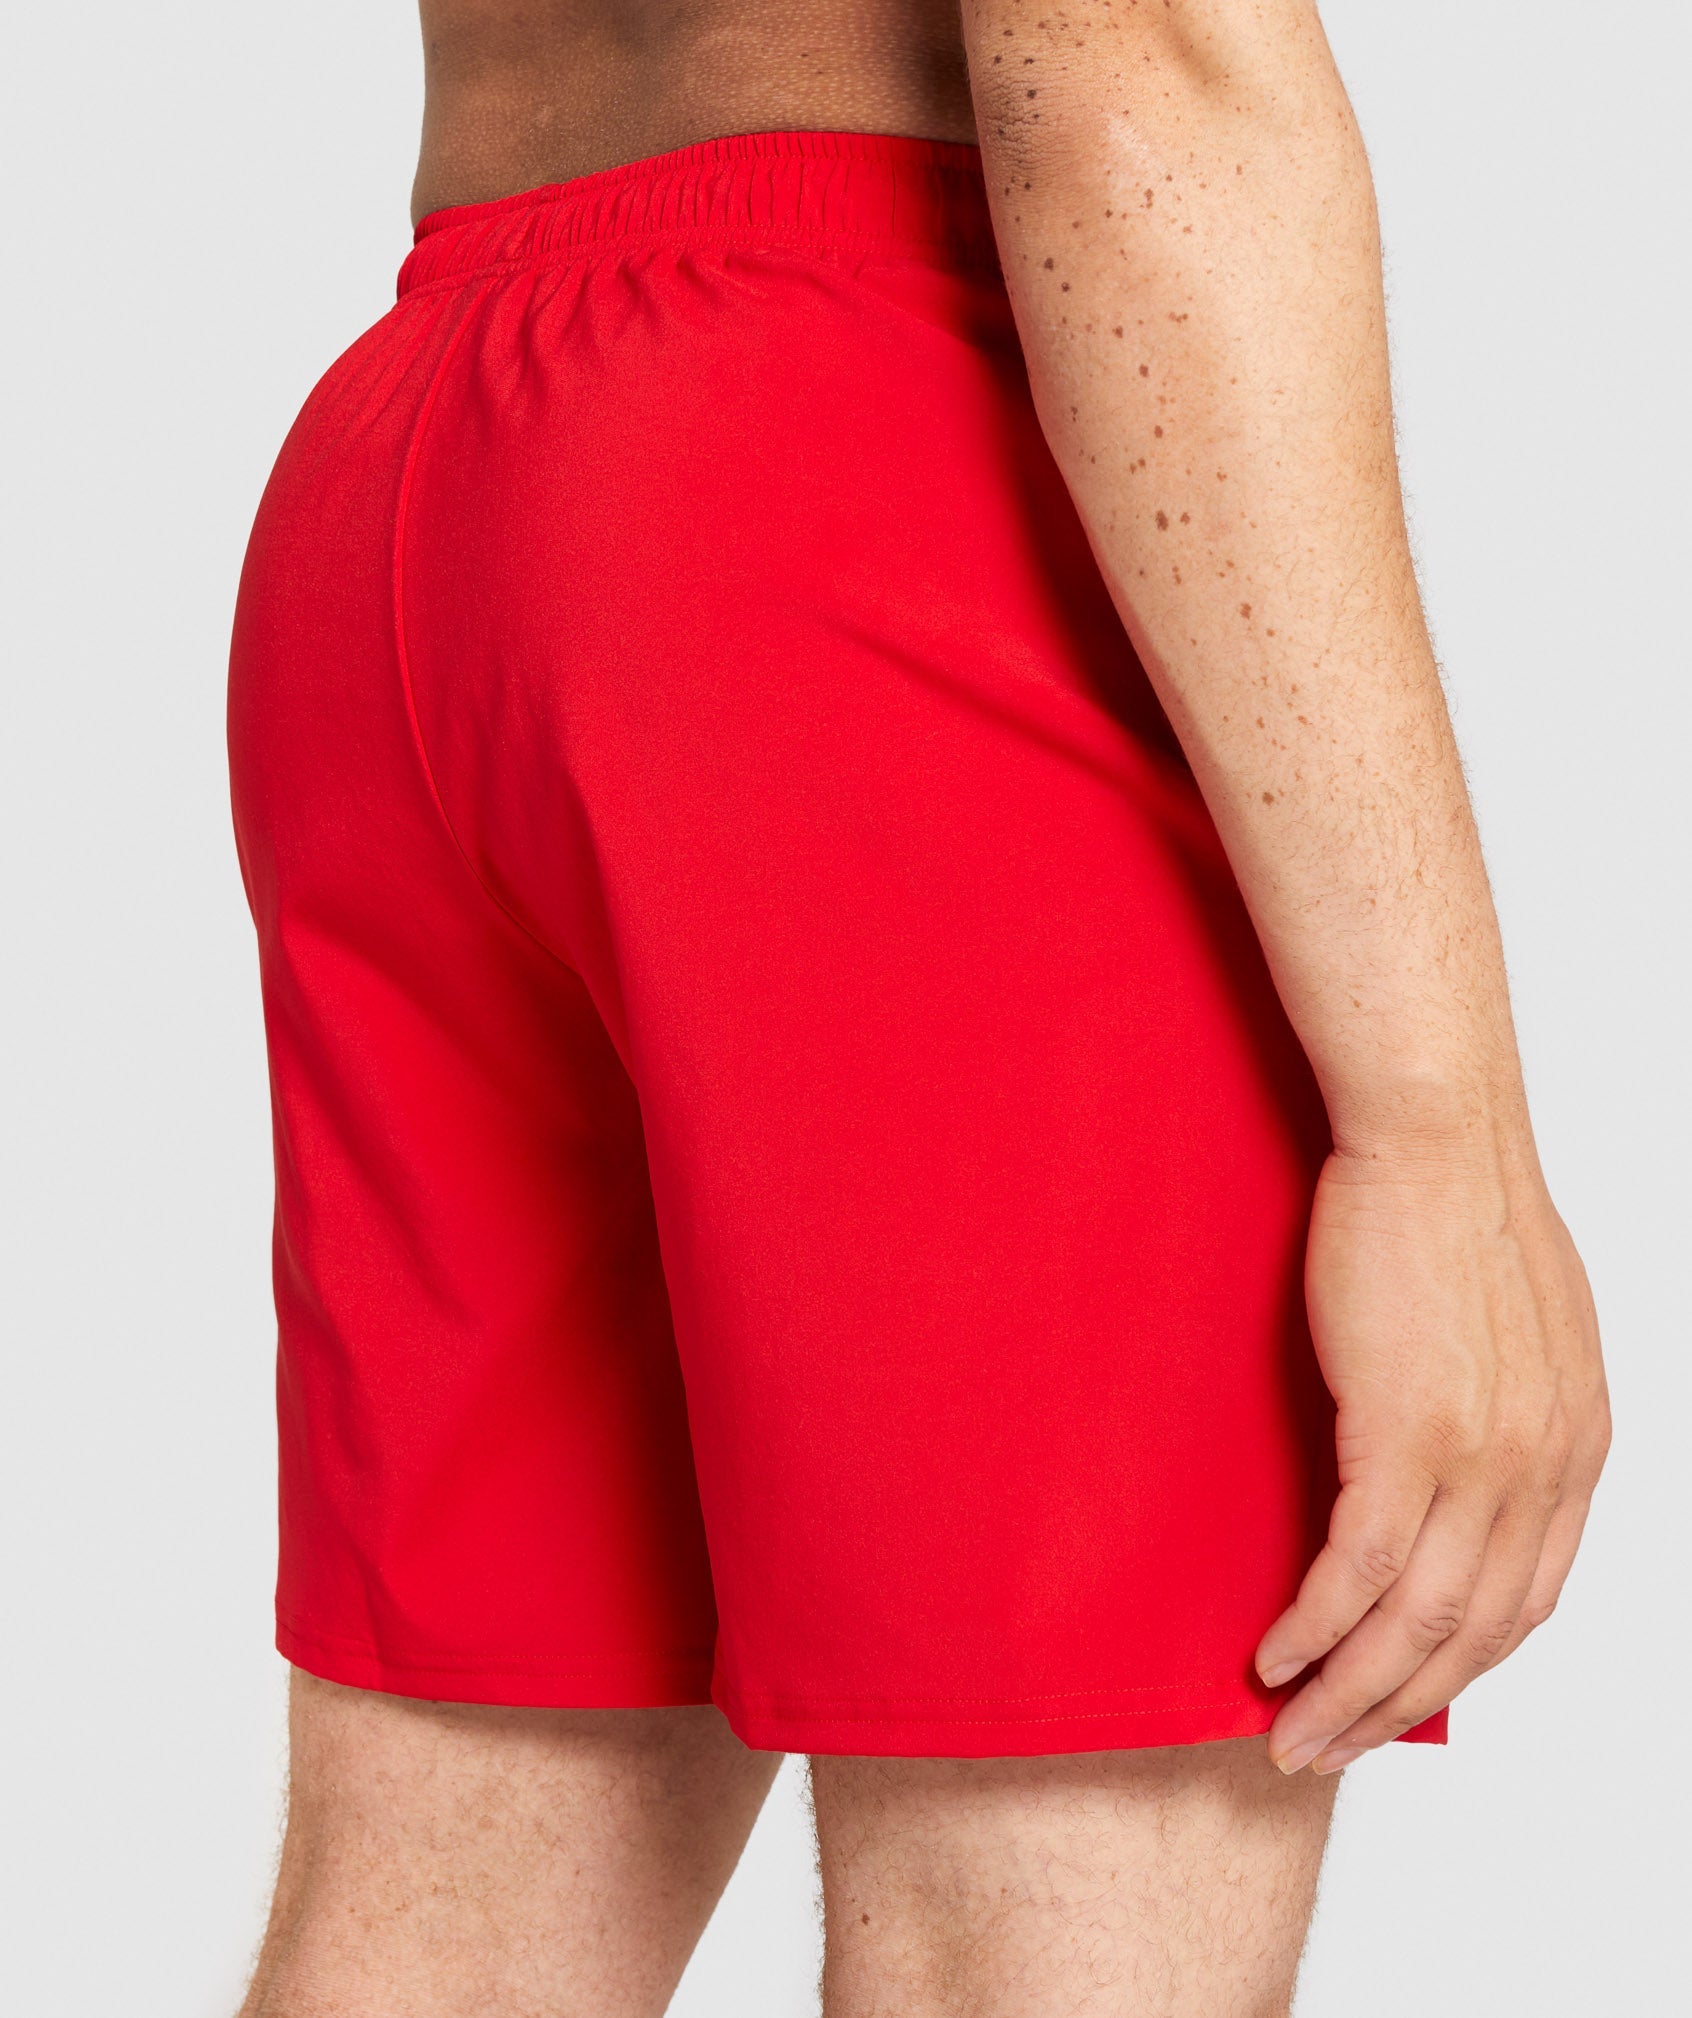 Arrival Shorts in Red - view 6